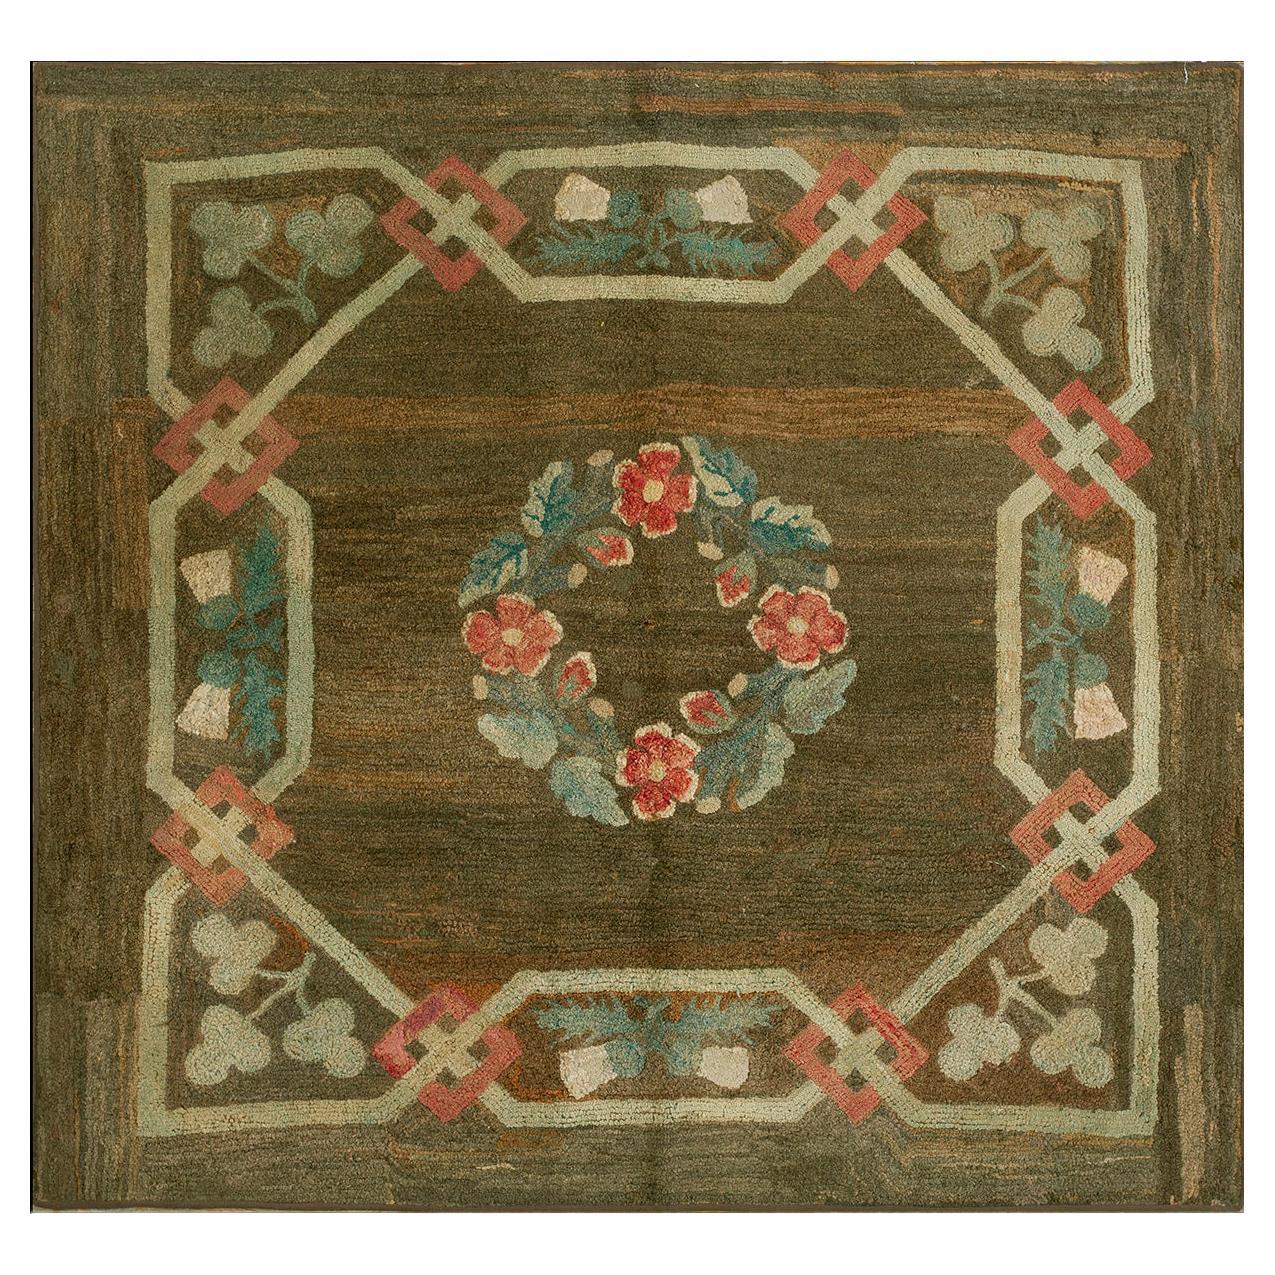 Early 20th Century American Hooked Rug ( 5' 9''x5' 10'' - 175 x 177 cm )